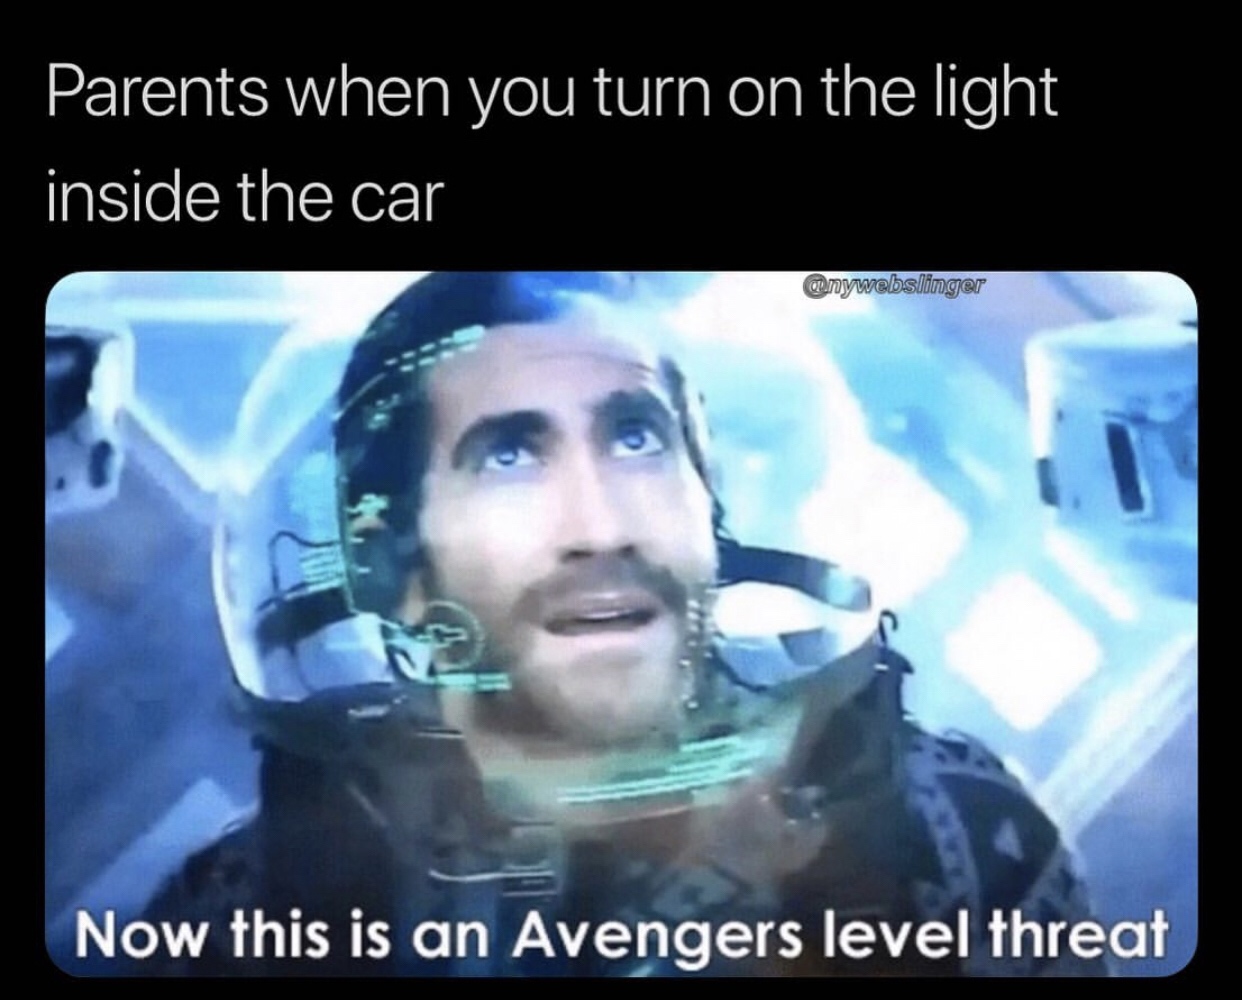 now this is an avengers level threat - Parents when you turn on the light inside the car Now this is an Avengers level threat